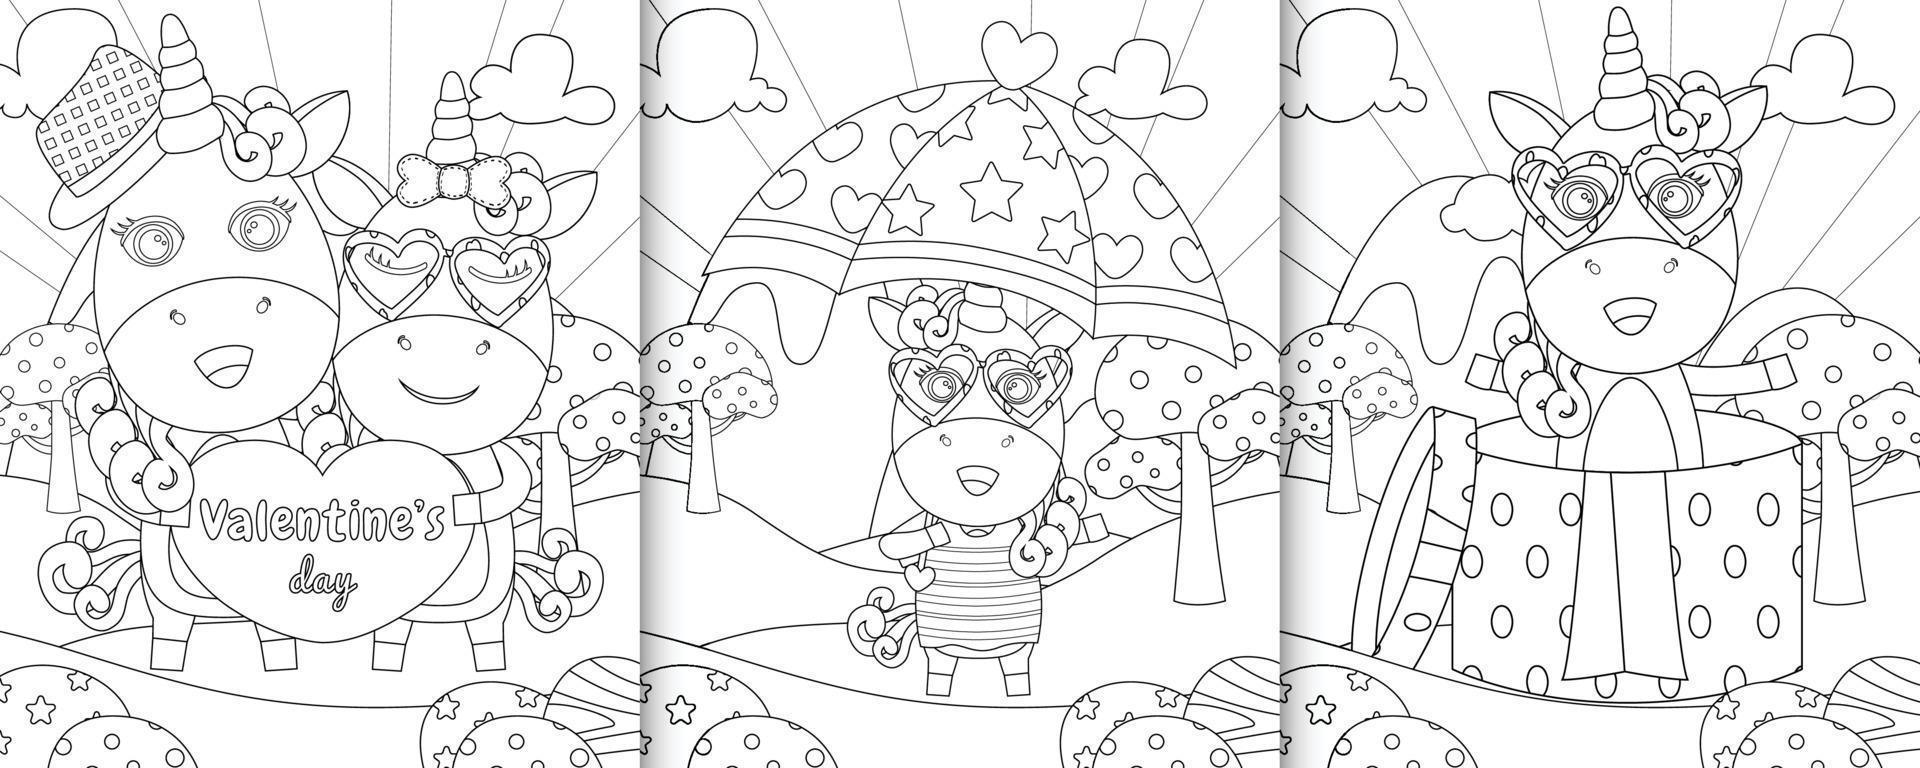 coloring book with cute unicorn characters themed valentine day vector